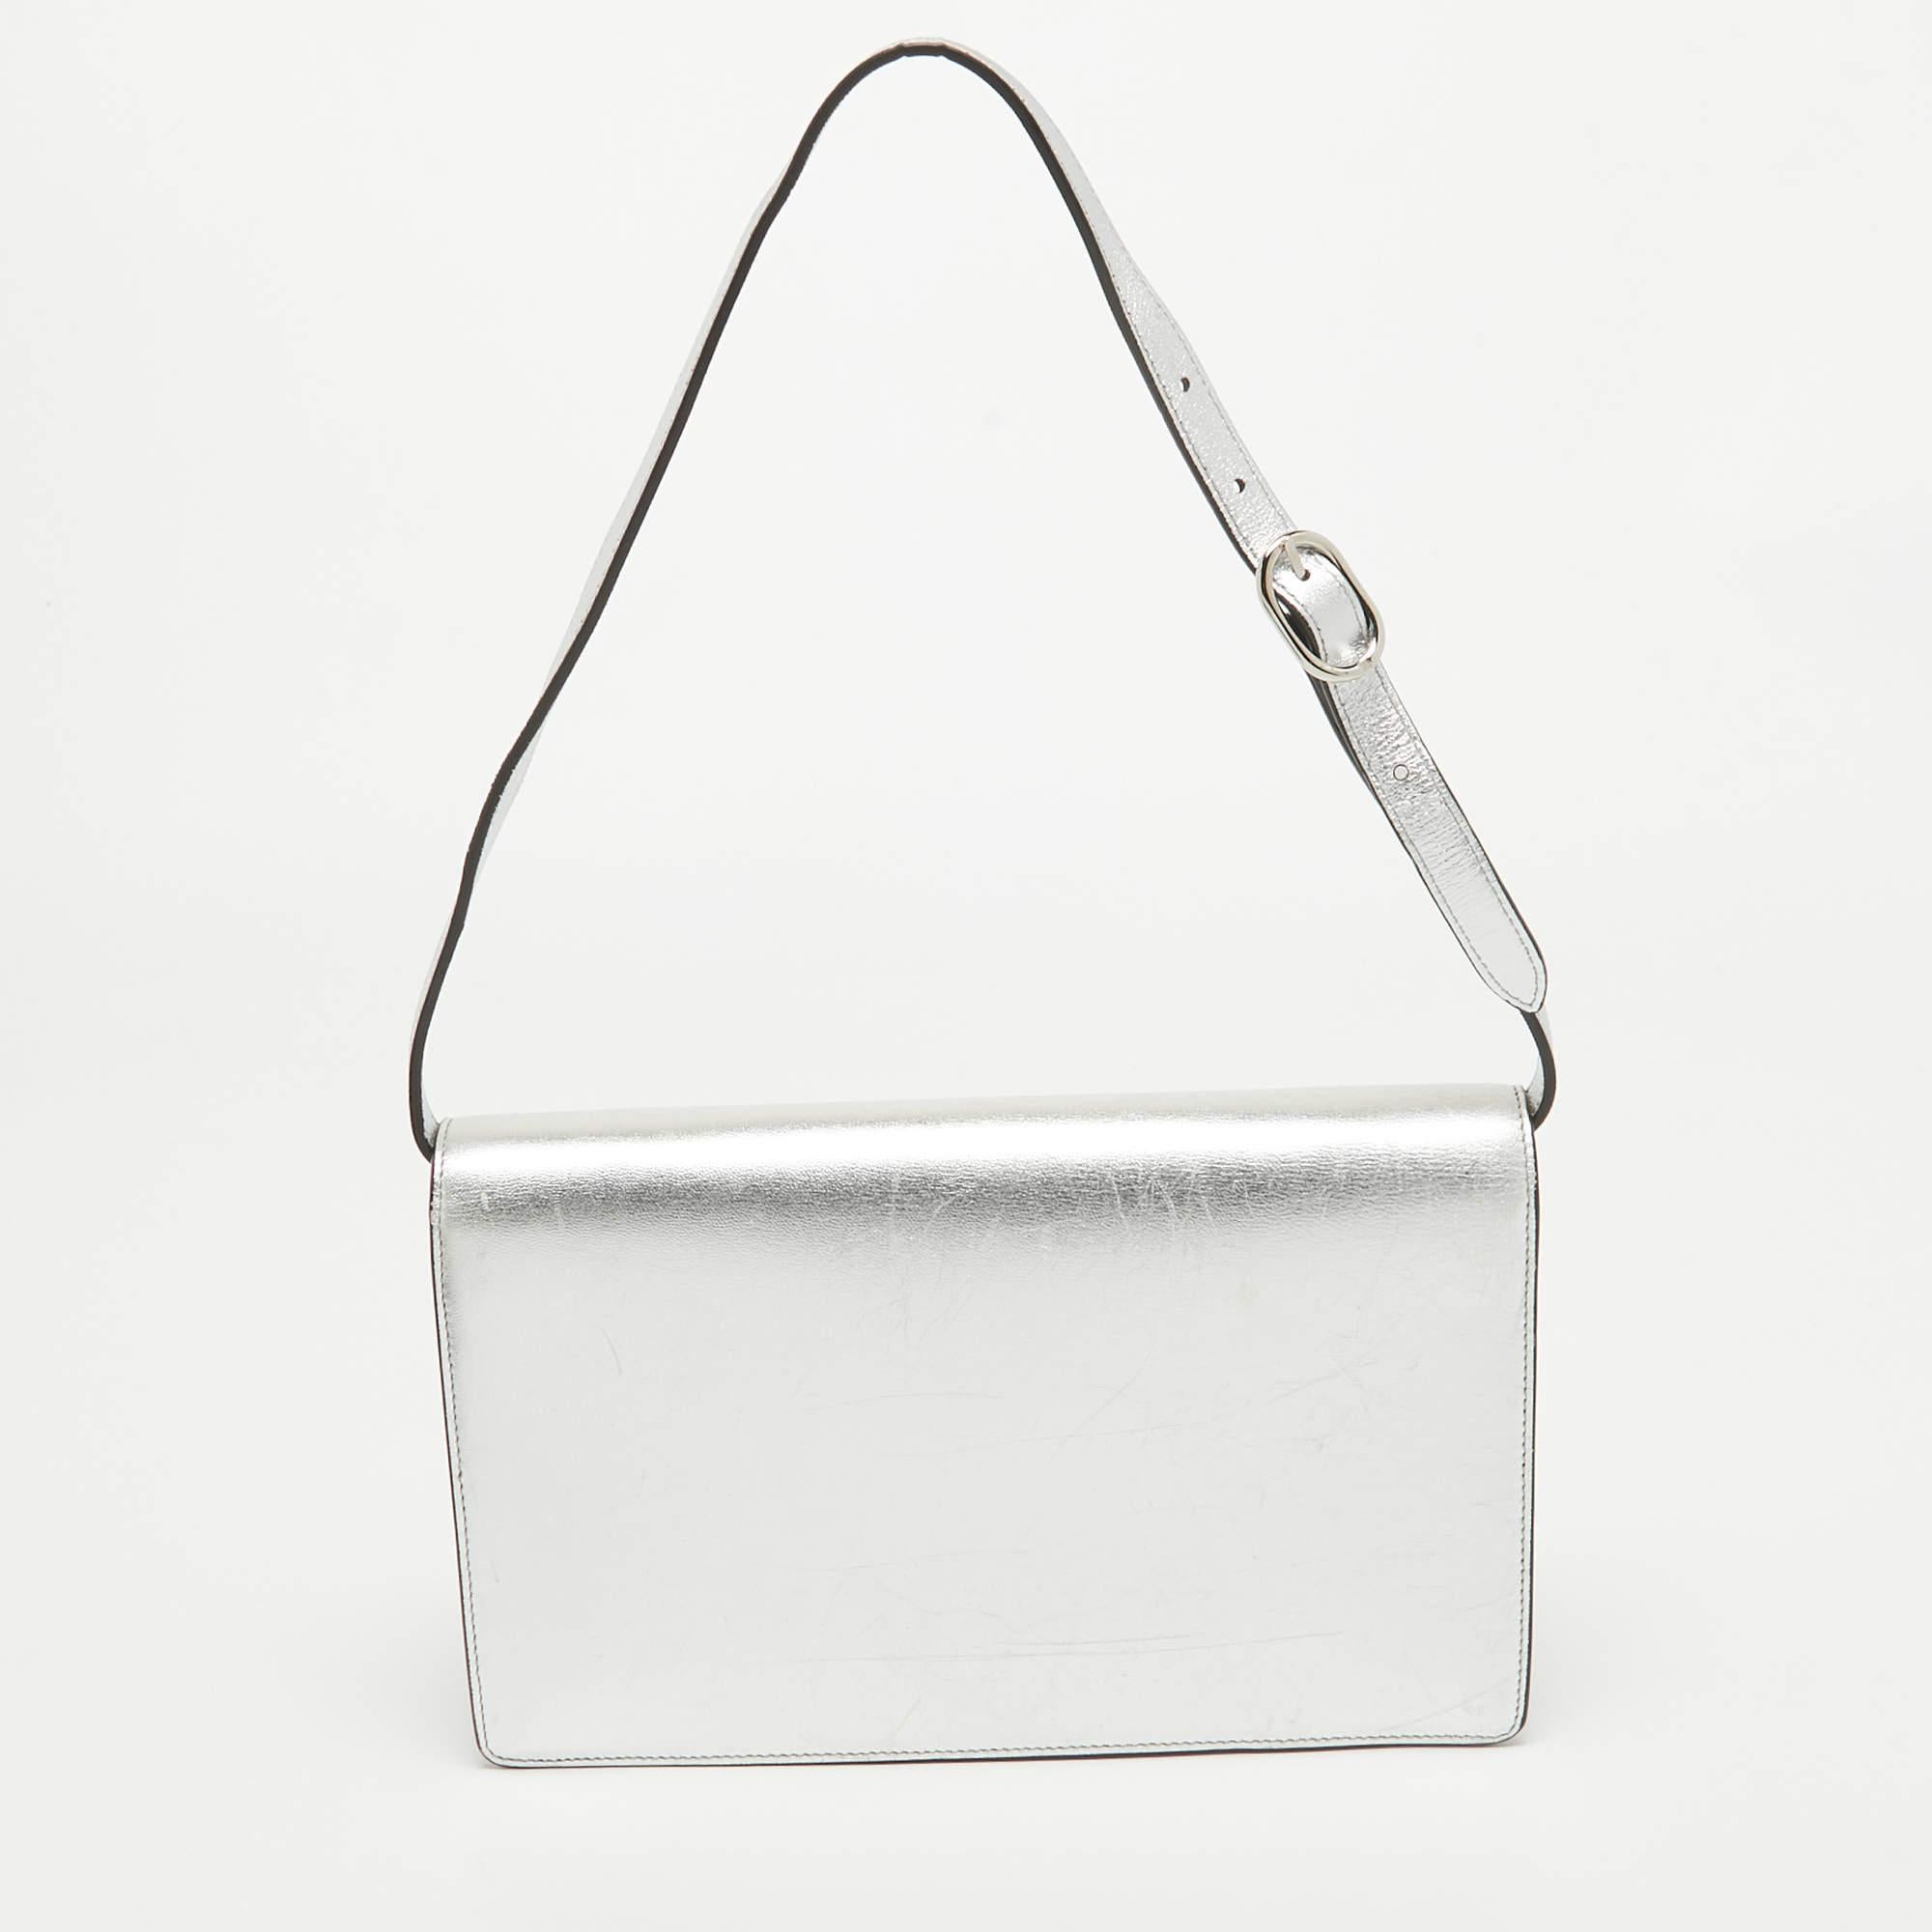 It is so easy to fall in love with this bag from Gucci. Silver in color and stunning in appeal, this creation will be a fantastic addition to your closet. Meticulously crafted from leather, this Broadway bag comes styled with a crystal-embellished